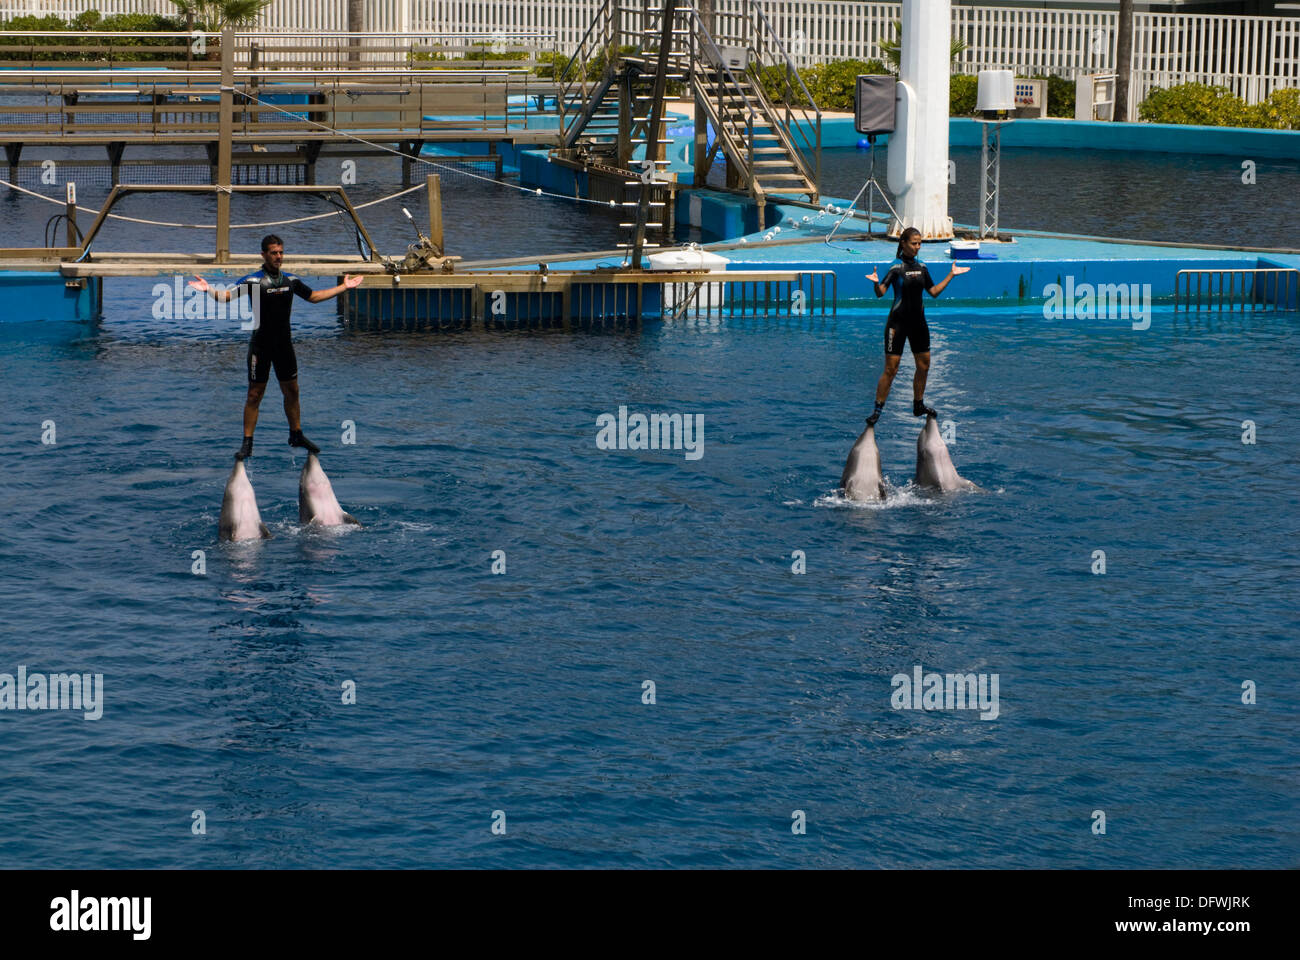 The balancing act by the Bottlenose Dolphins at the L'Oceanografic in Valencia, Spain. Stock Photo